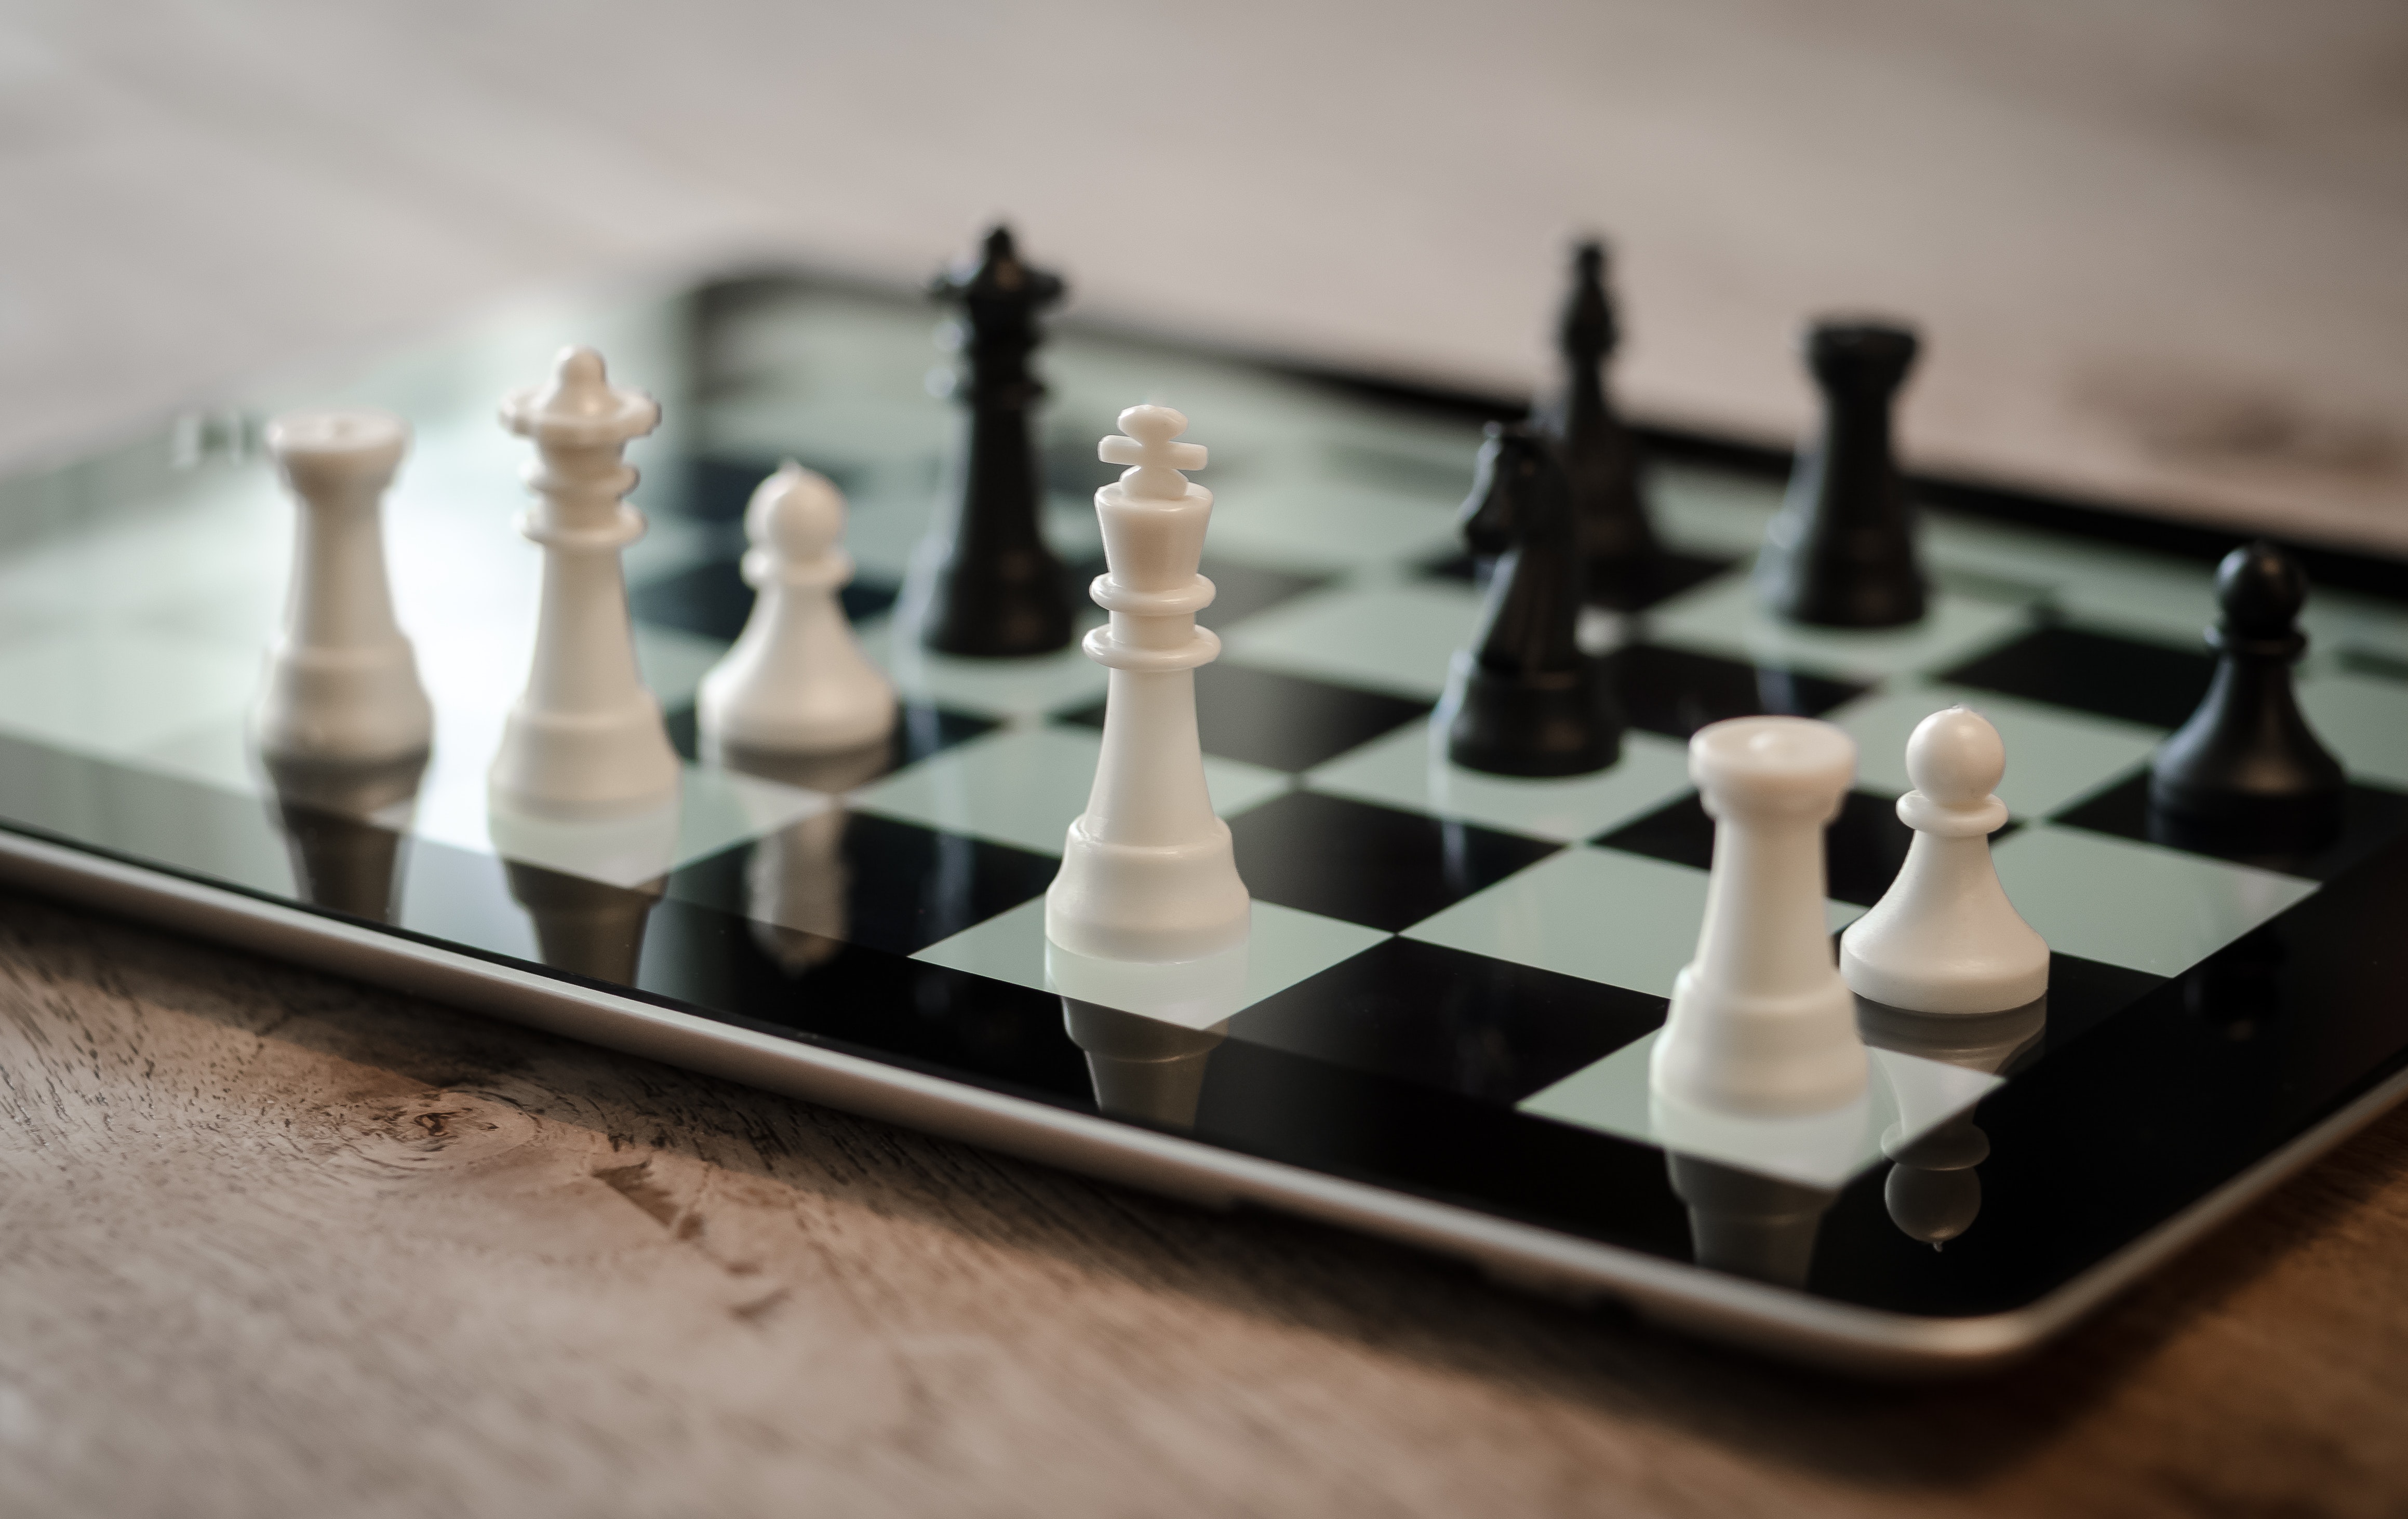 Tilt Shift Lens Photo of Black and White Chess Pieces, Board game, Leisure, Victory, Technology, HQ Photo